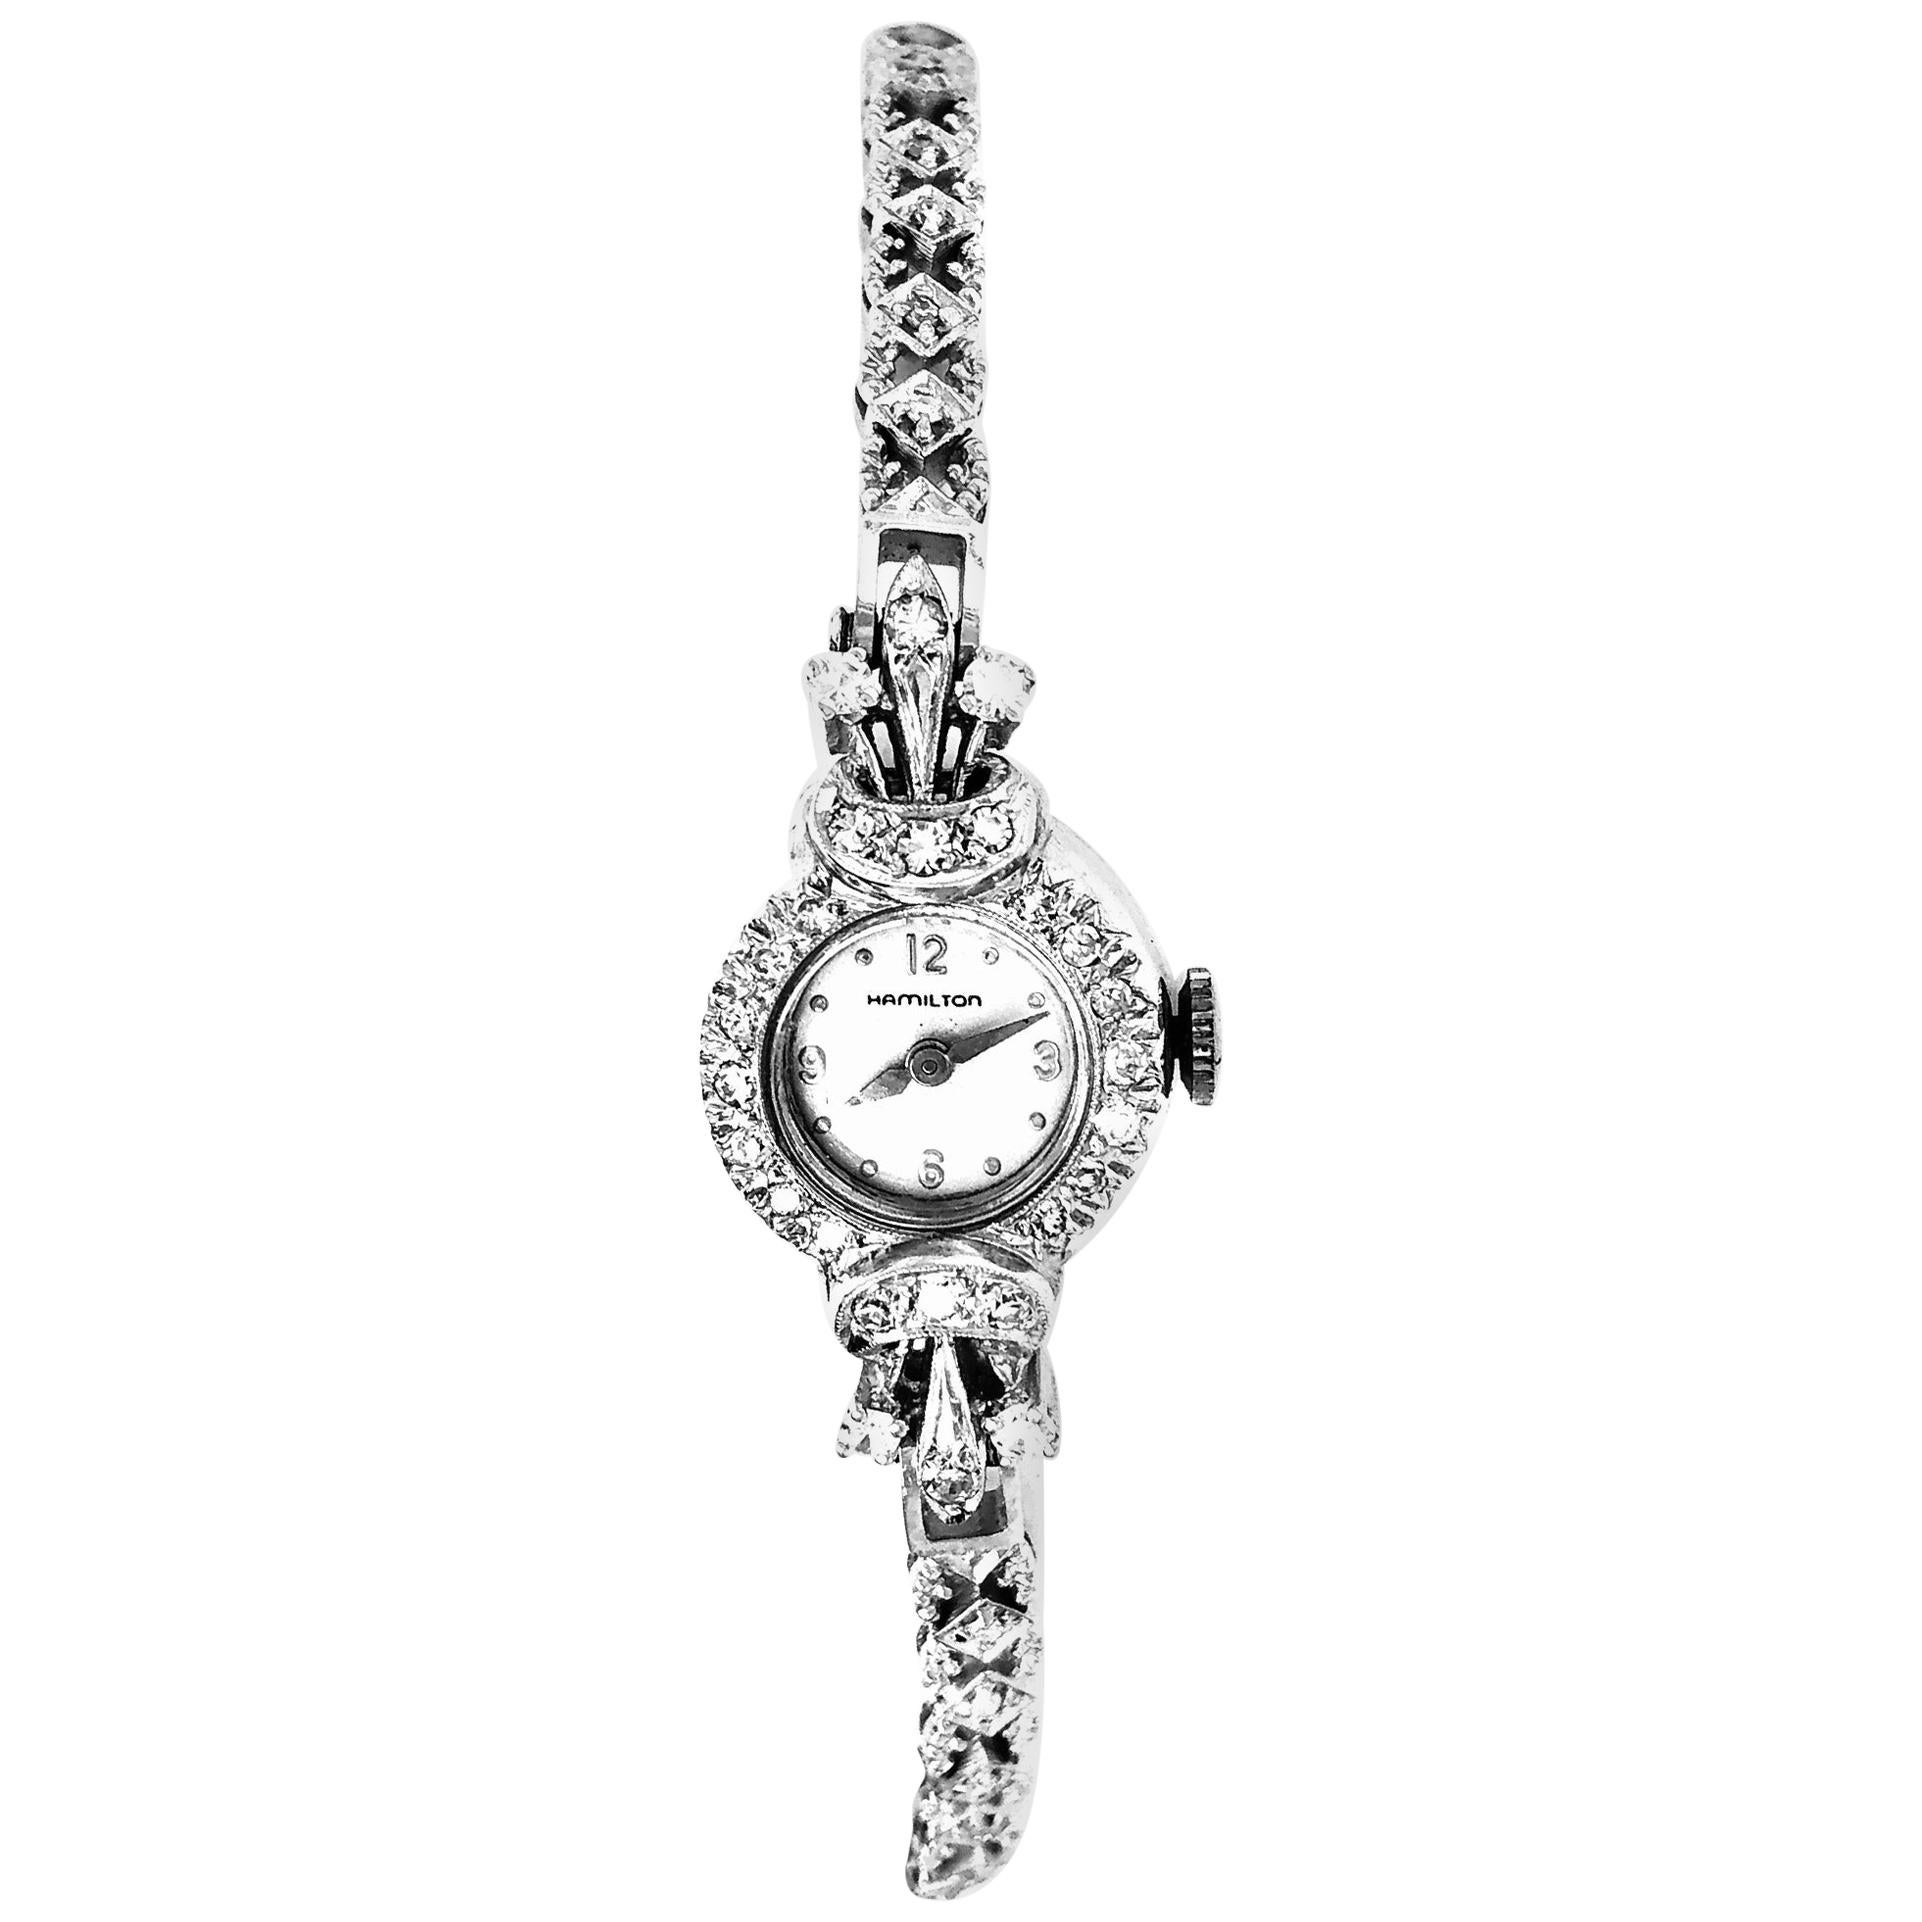 Hamilton 14 Karat Ladies Watch 52 Total Diamonds 17.85 grams 2.00 TDW.

The Hamilton Watch Company is a Swiss manufacturer of wristwatches based in Bienne, Switzerland. The Hamilton Watch Company had its genesis as an American watch design and